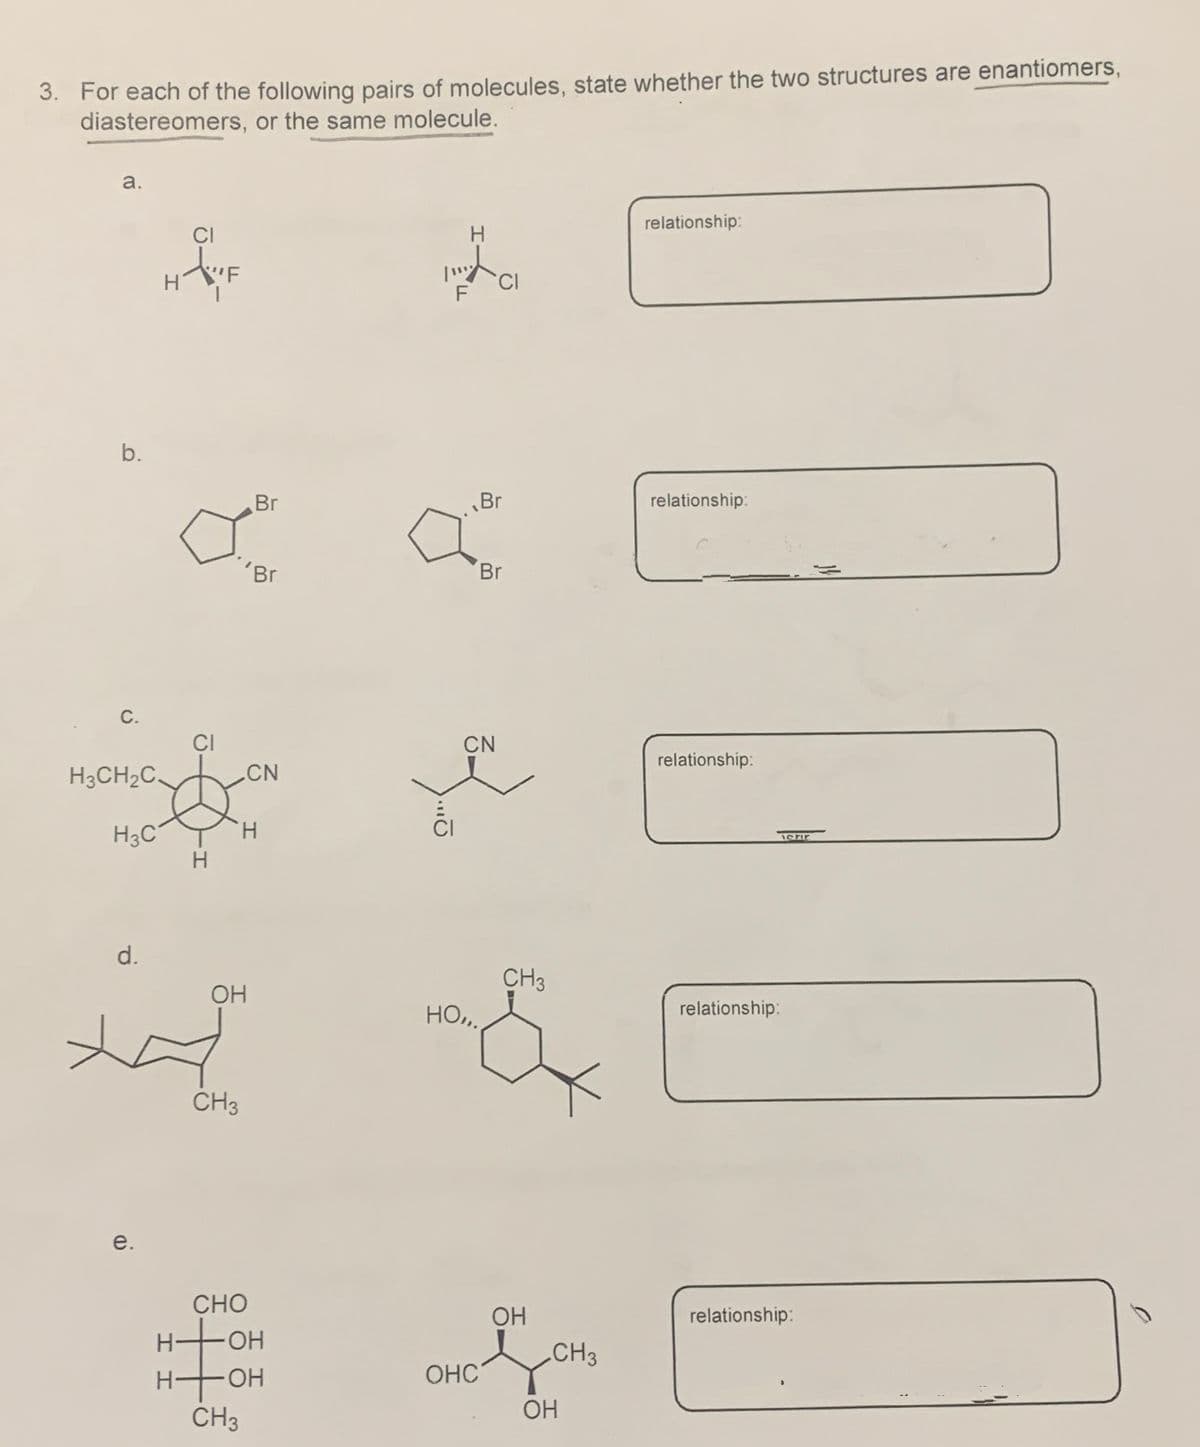 3. For each of the following pairs of molecules, state whether the two structures are enantiomers,
diastereomers, or the same molecule.
a.
F
H
relationship:
זן
F
CI
b.
Br
Br
relationship:
'Br
Br
C.
H3CH2C
H3C
CI
CN
H
H
Ö
CN
relationship:
d.
OH
HO.
e.
CH3
CH3
relationship:
H-
I
CHO
-OH
HOH
CH3
OH
CH3
བསྡུ་ལུ་ལུ།(༡༨༦
OHC
OH
relationship: